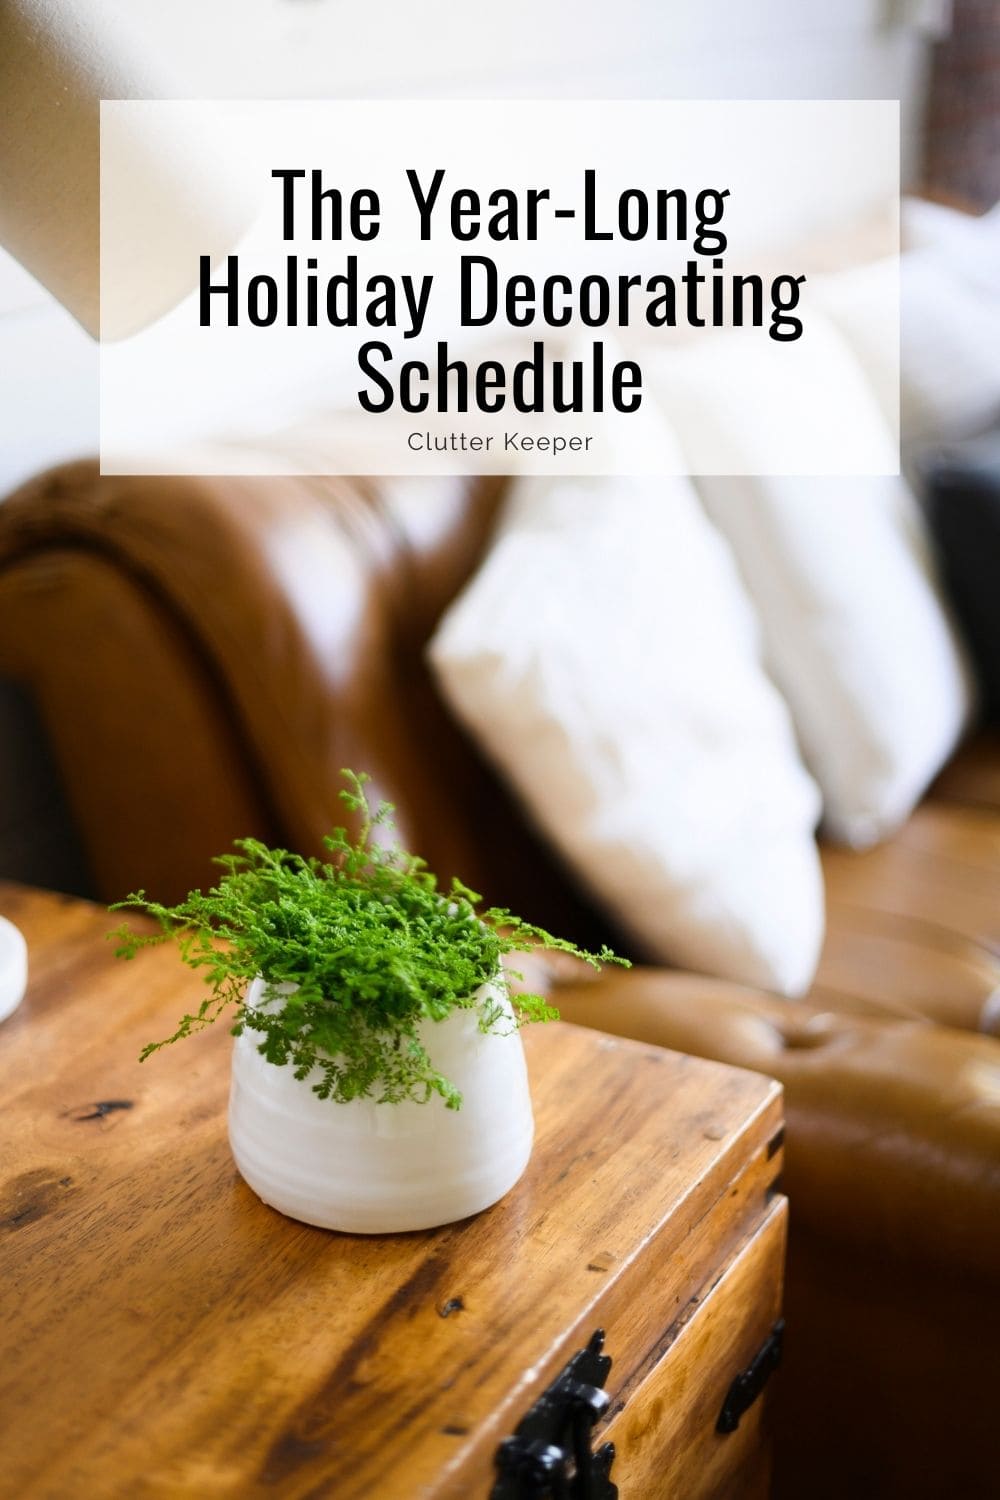 The year-long holiday decorating schedule.